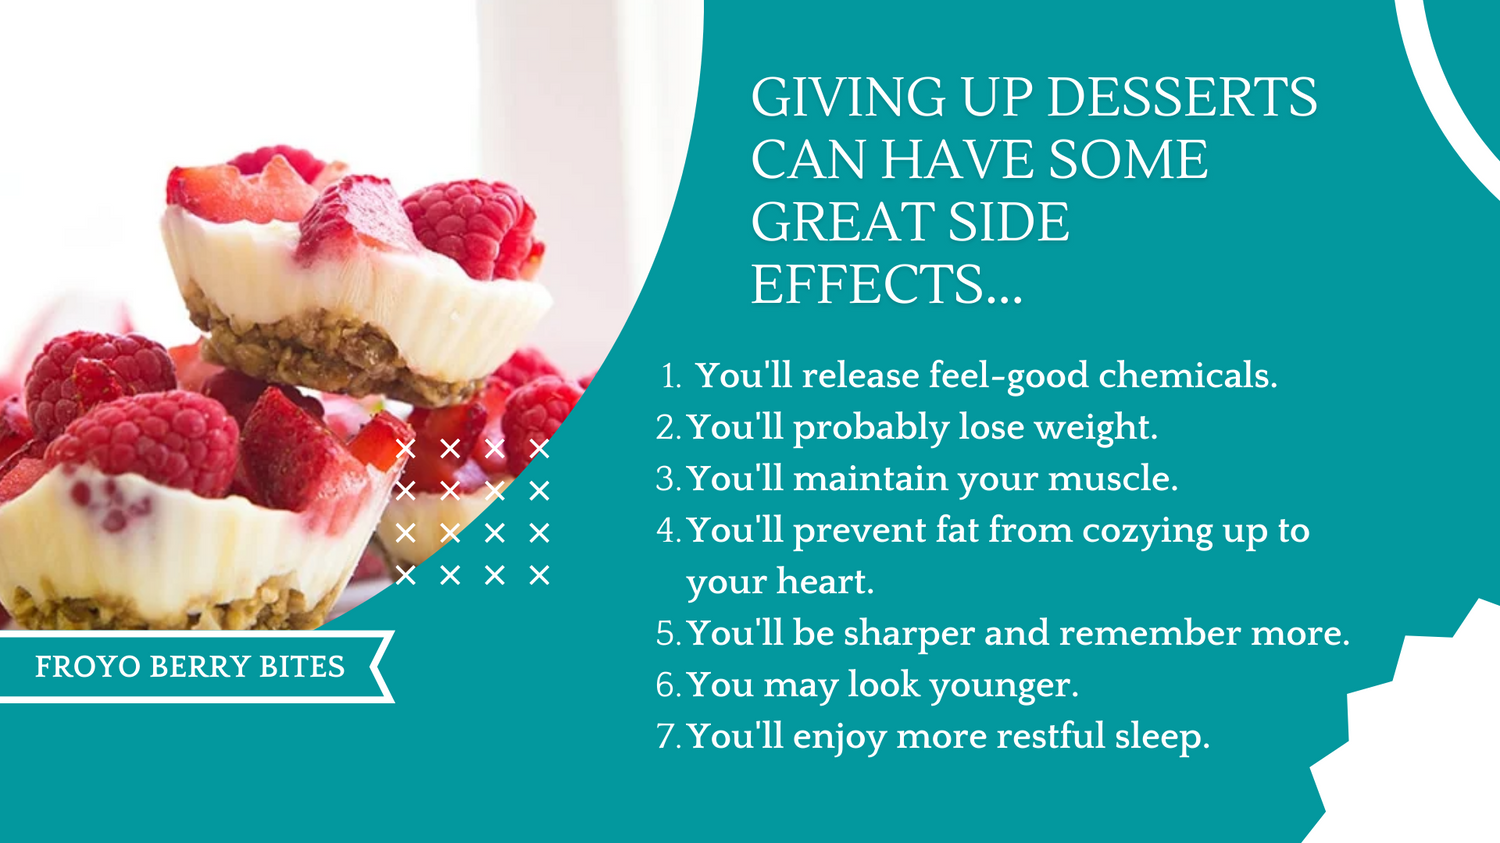 Ditch those unhealthy desserts 2